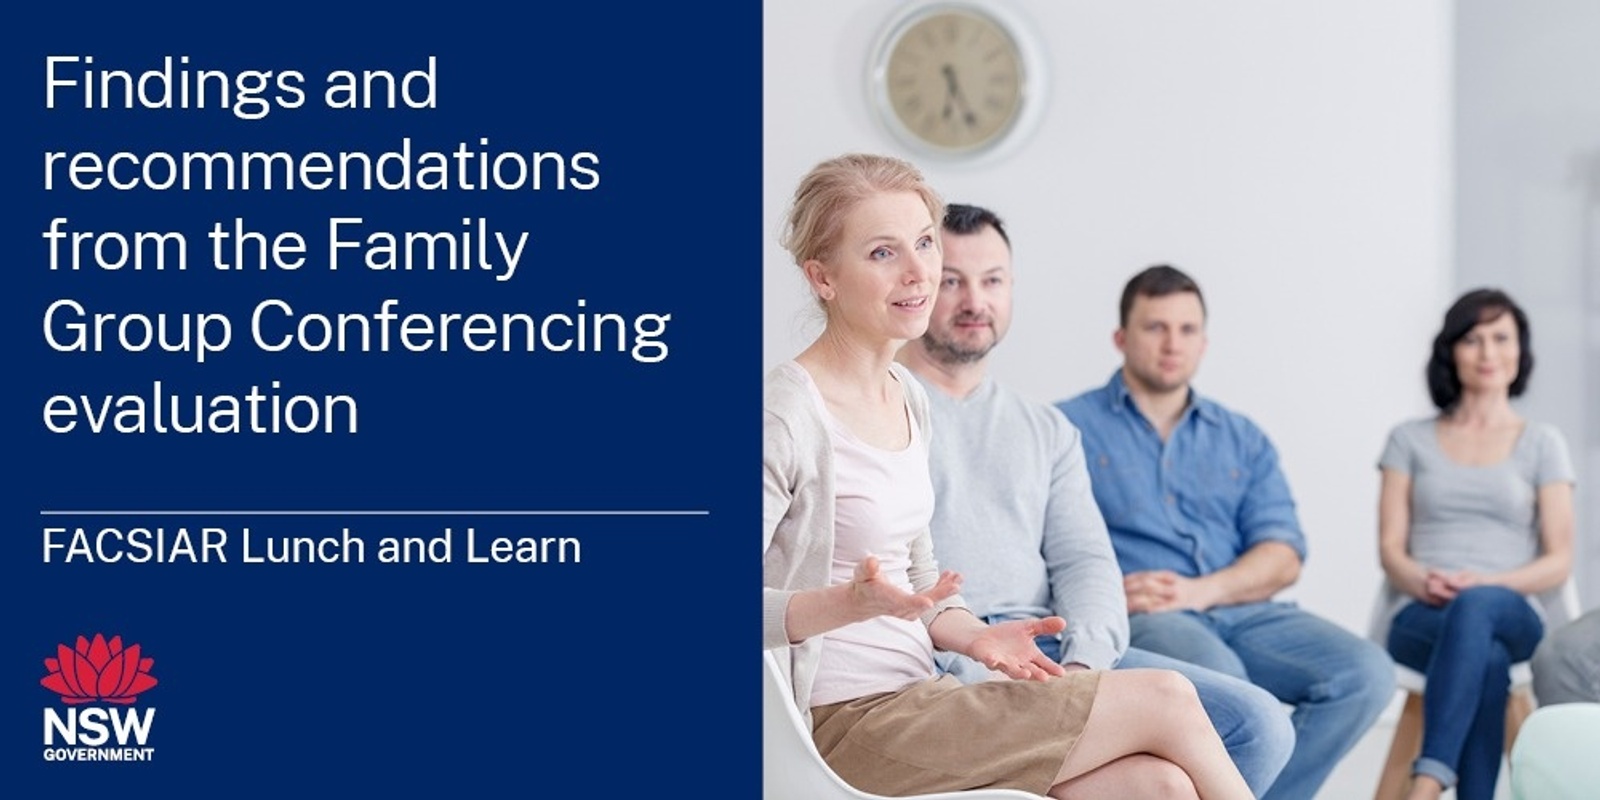 Banner image for Findings and recommendations from the Family Group Conferencing evaluation